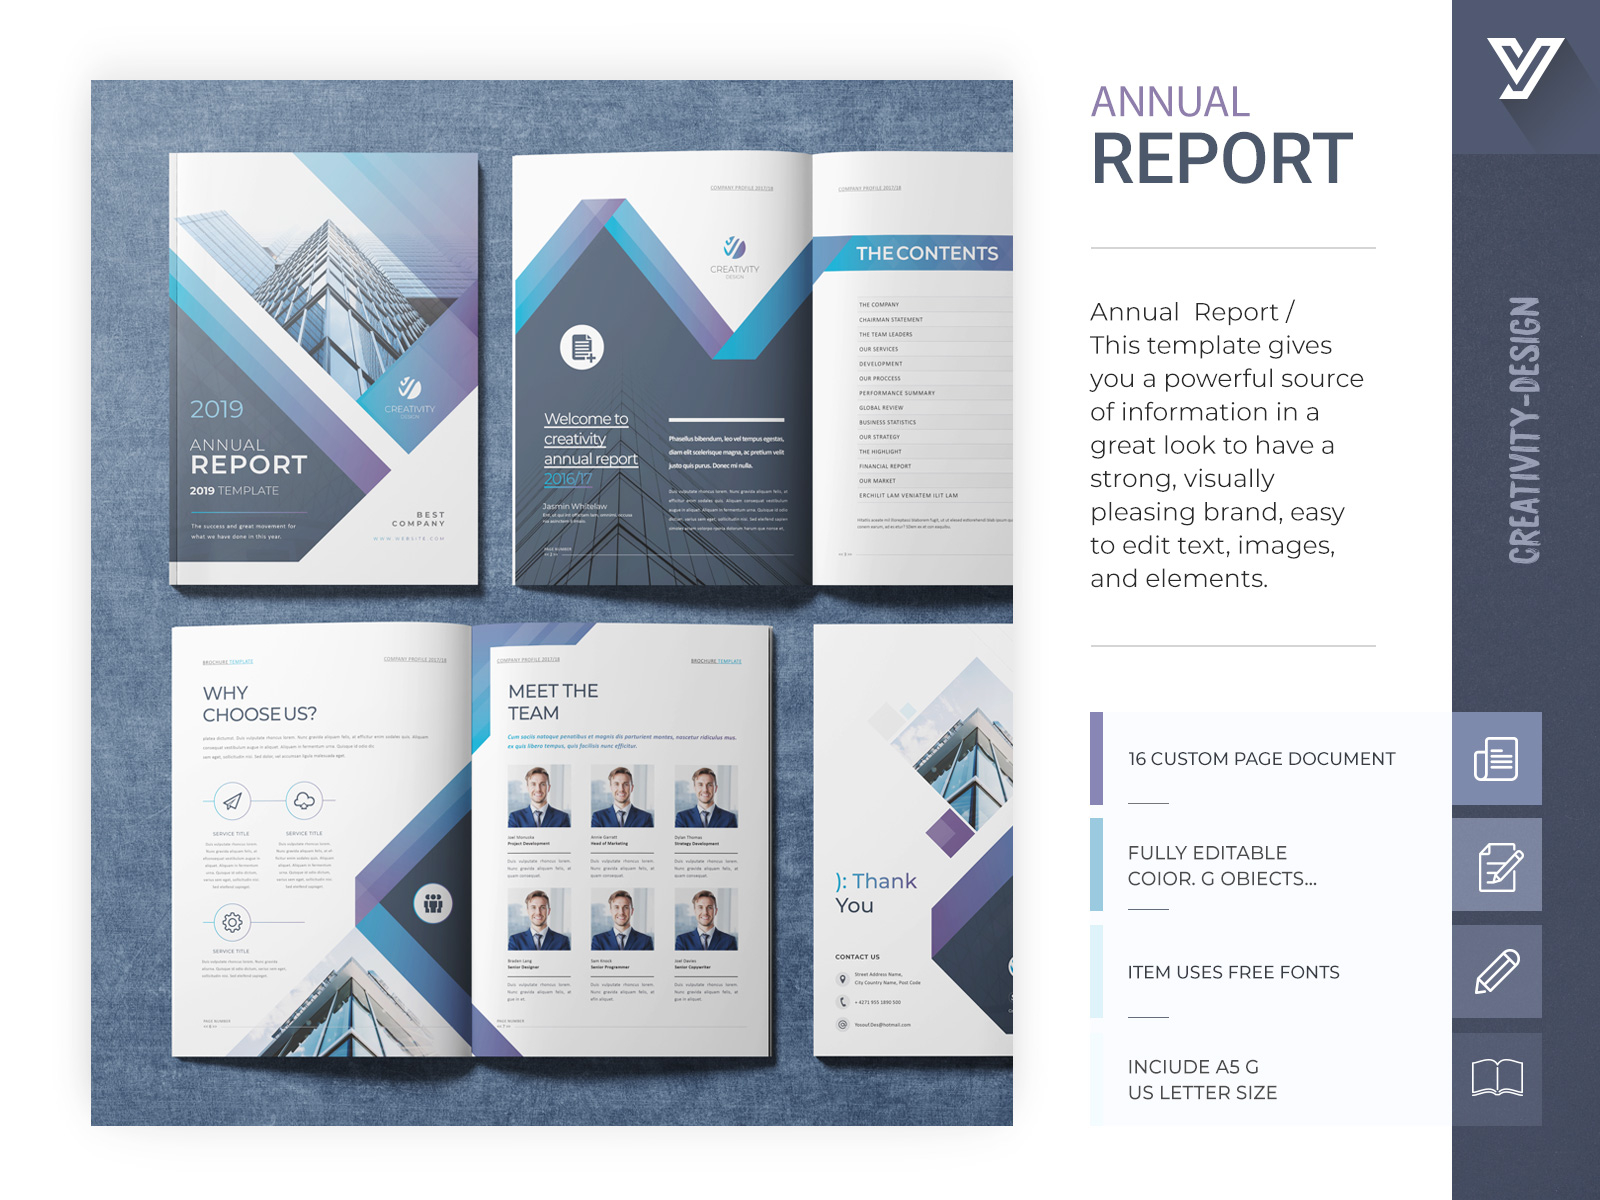 Annual Report Template by Creativity-Design on Dribbble With Chairmans Annual Report Template